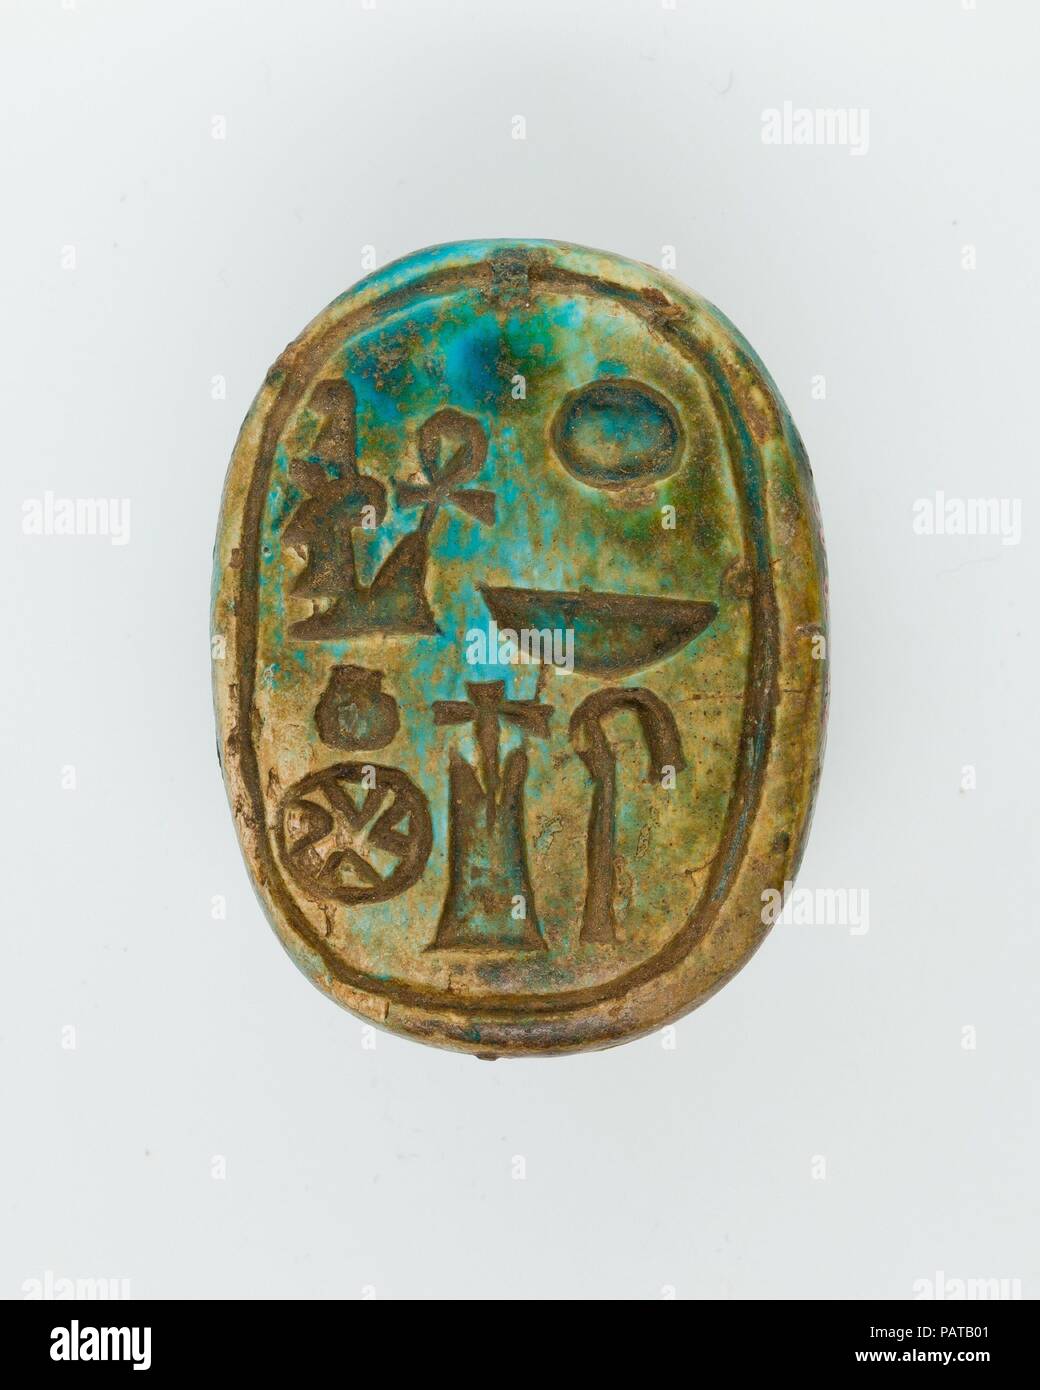 Scarab of Amenhotep III, ruler of Heliopolis. Dimensions: L. 4.7 cm (1 7/8 in.); W. 3.6 cvm (1 7/16 in.); H. 2.3 cm (7/8 in.). Dynasty: Dynasty 18. Reign: reign of Amenhotep III. Date: ca. 1390-1352 B.C.. Museum: Metropolitan Museum of Art, New York, USA. Stock Photo